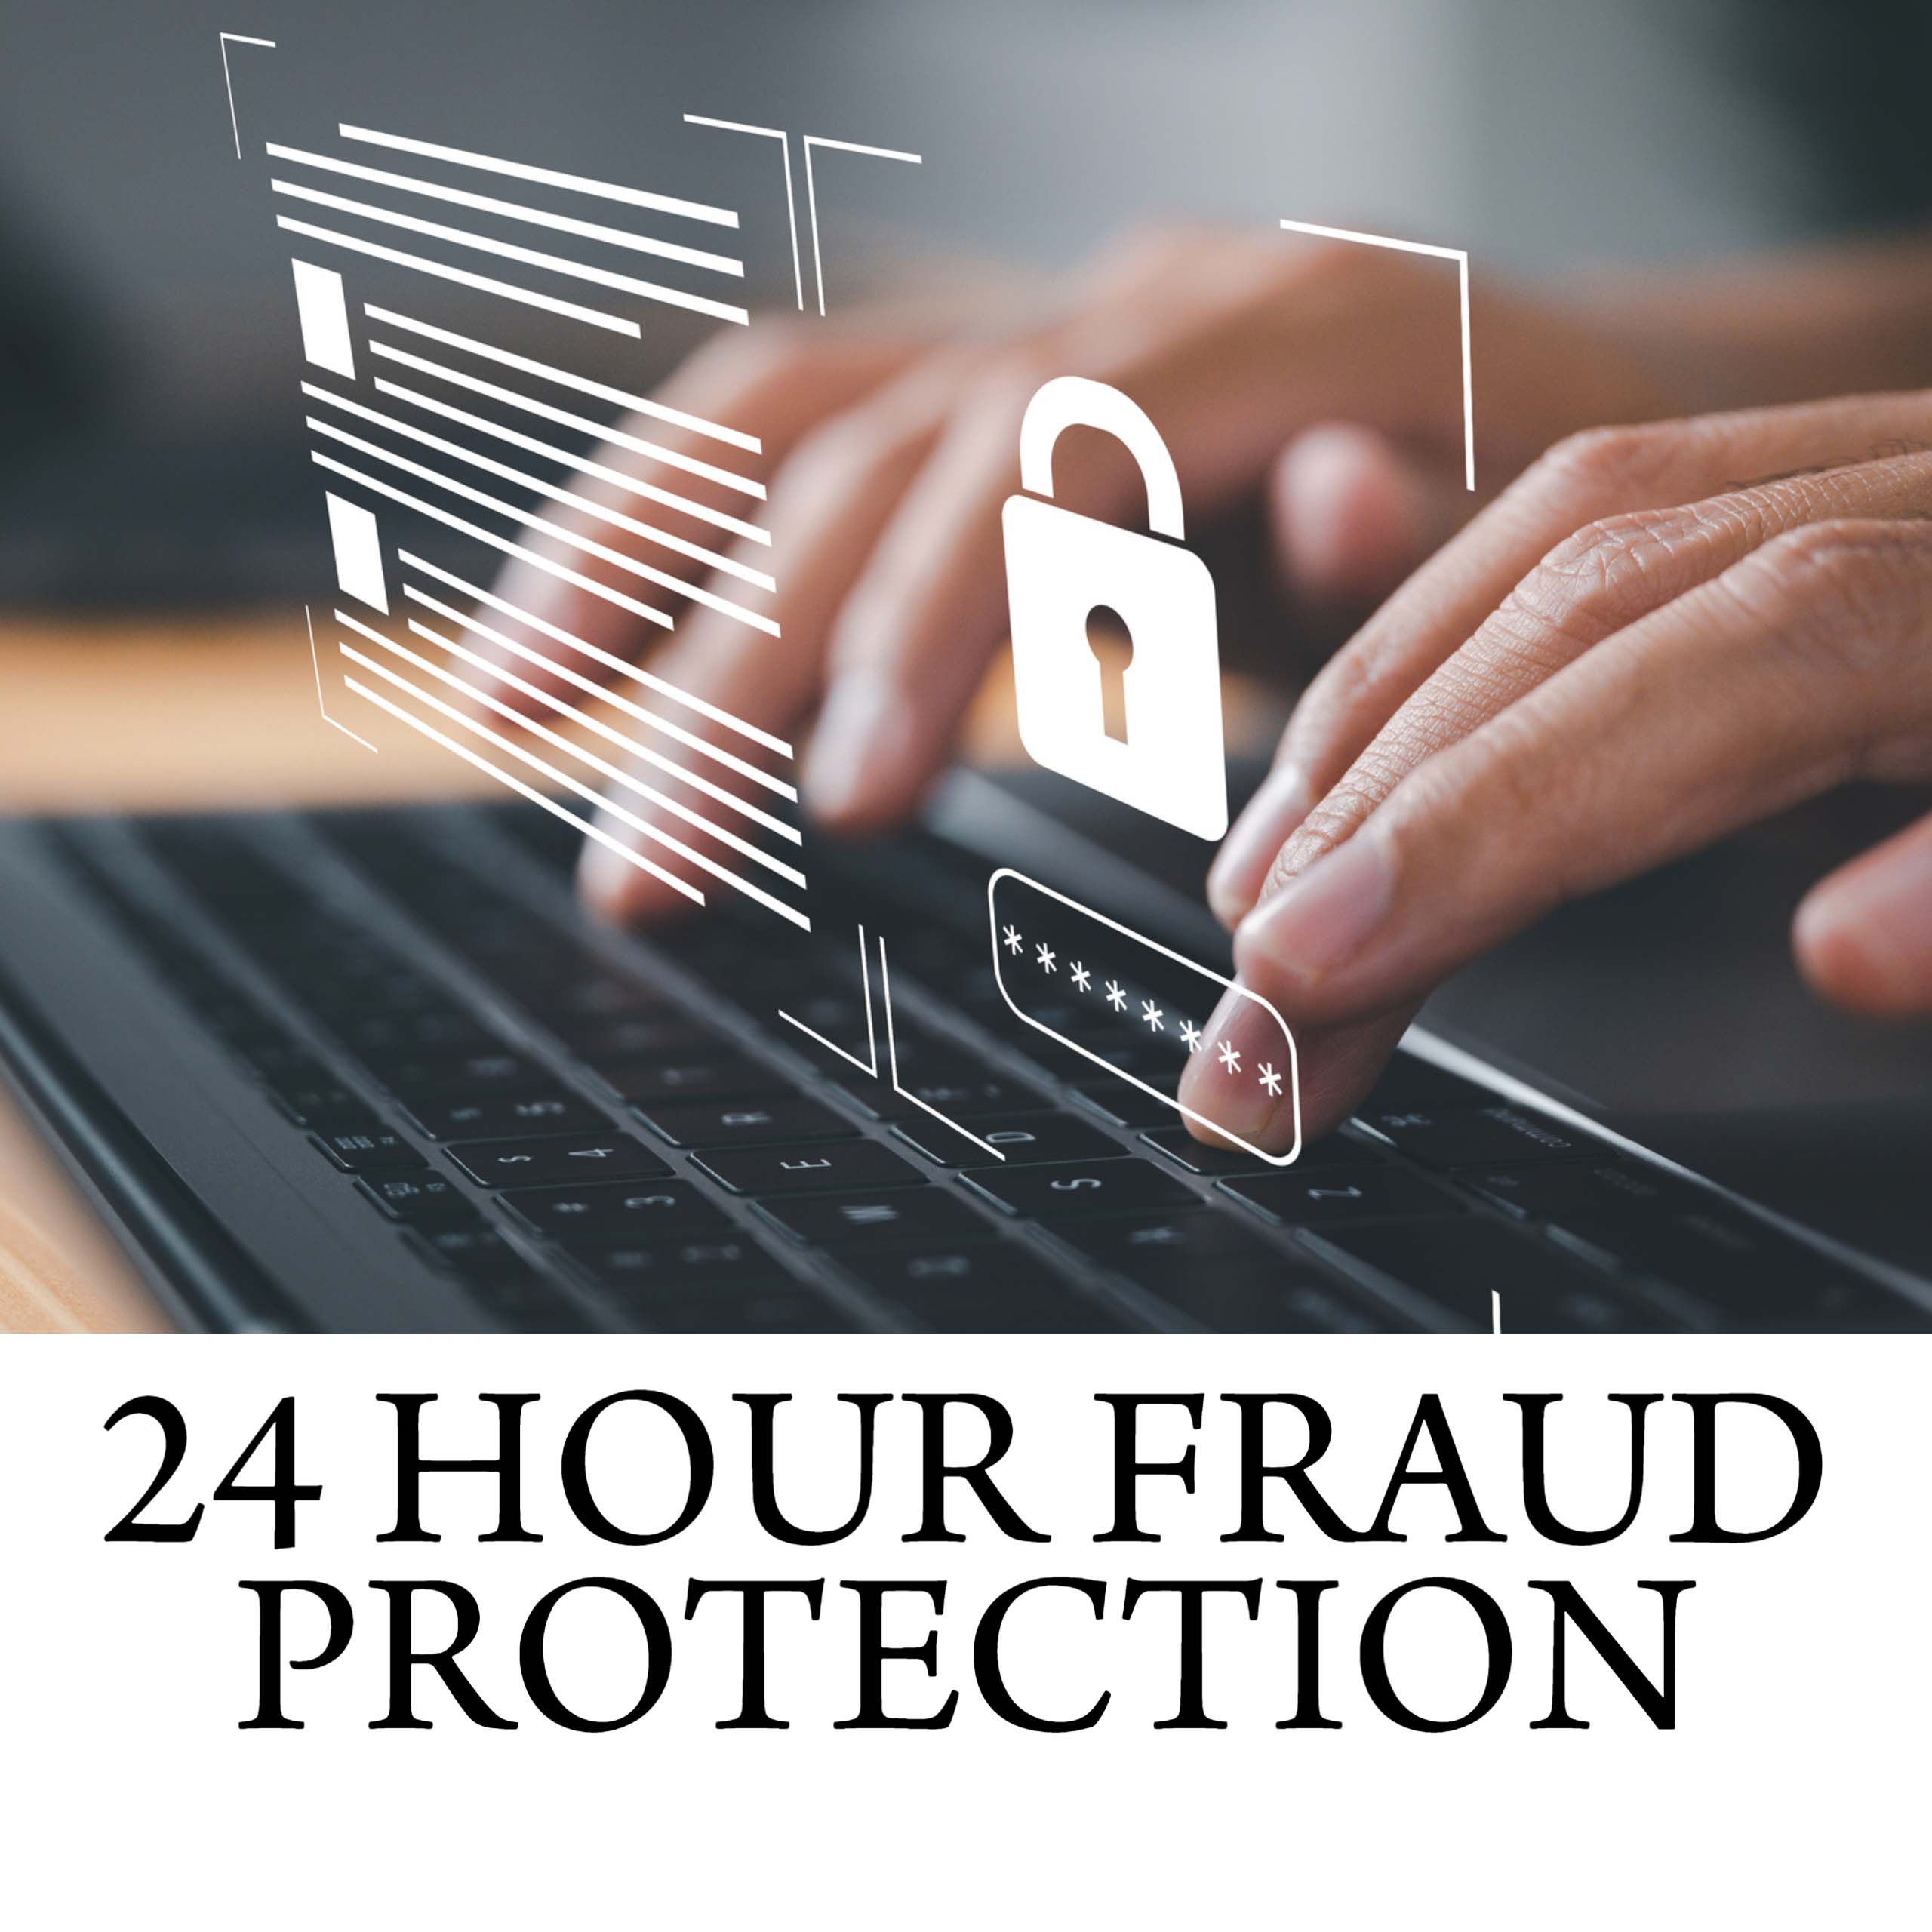 2023 24 hour fraud protection ICON